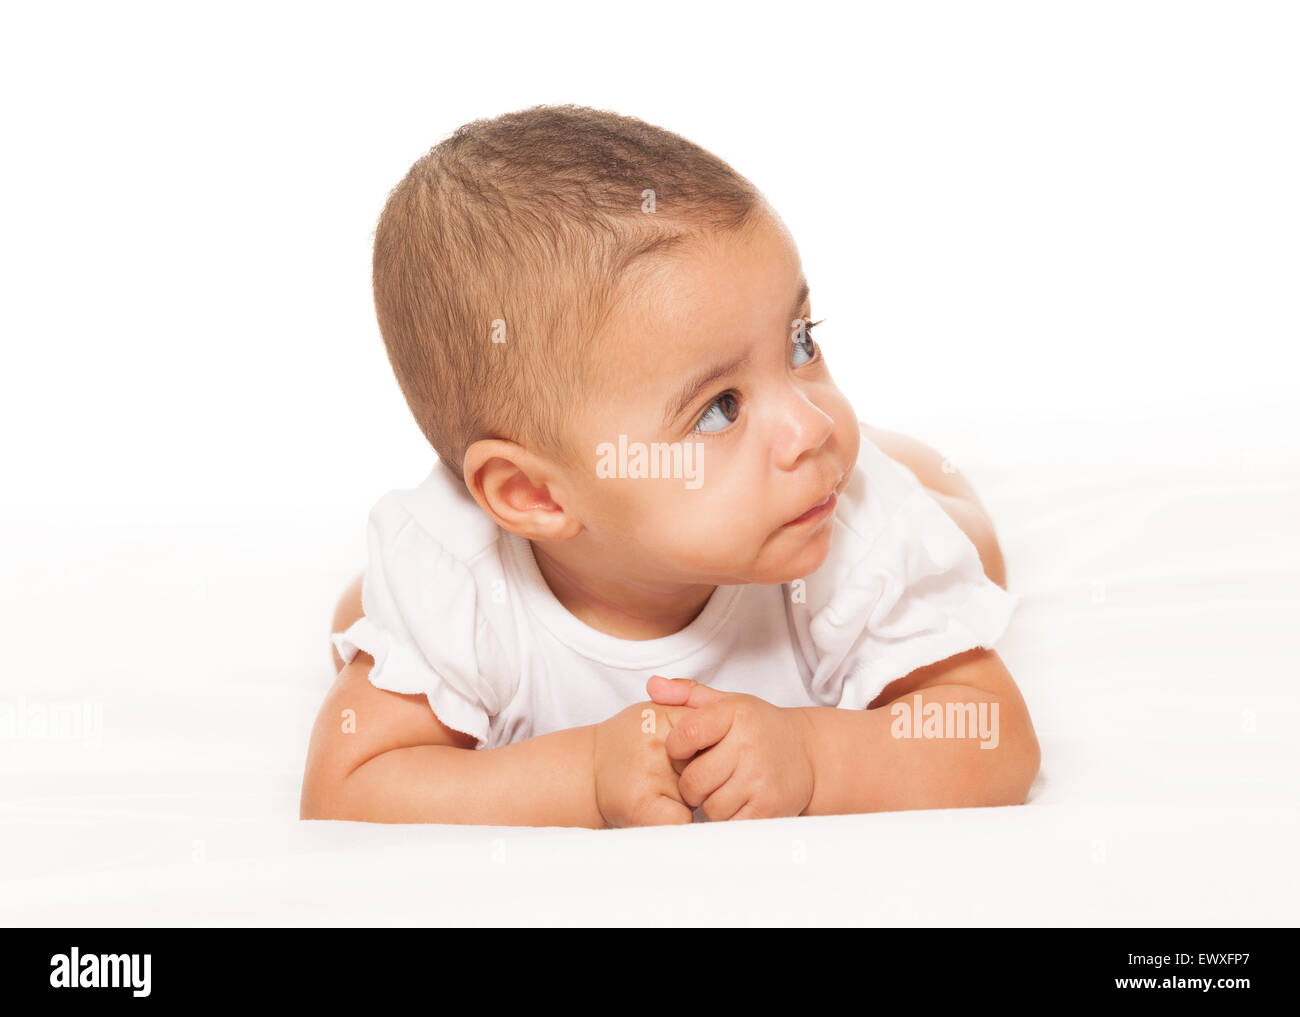 Curious looking African baby in white bodysuit Stock Photo